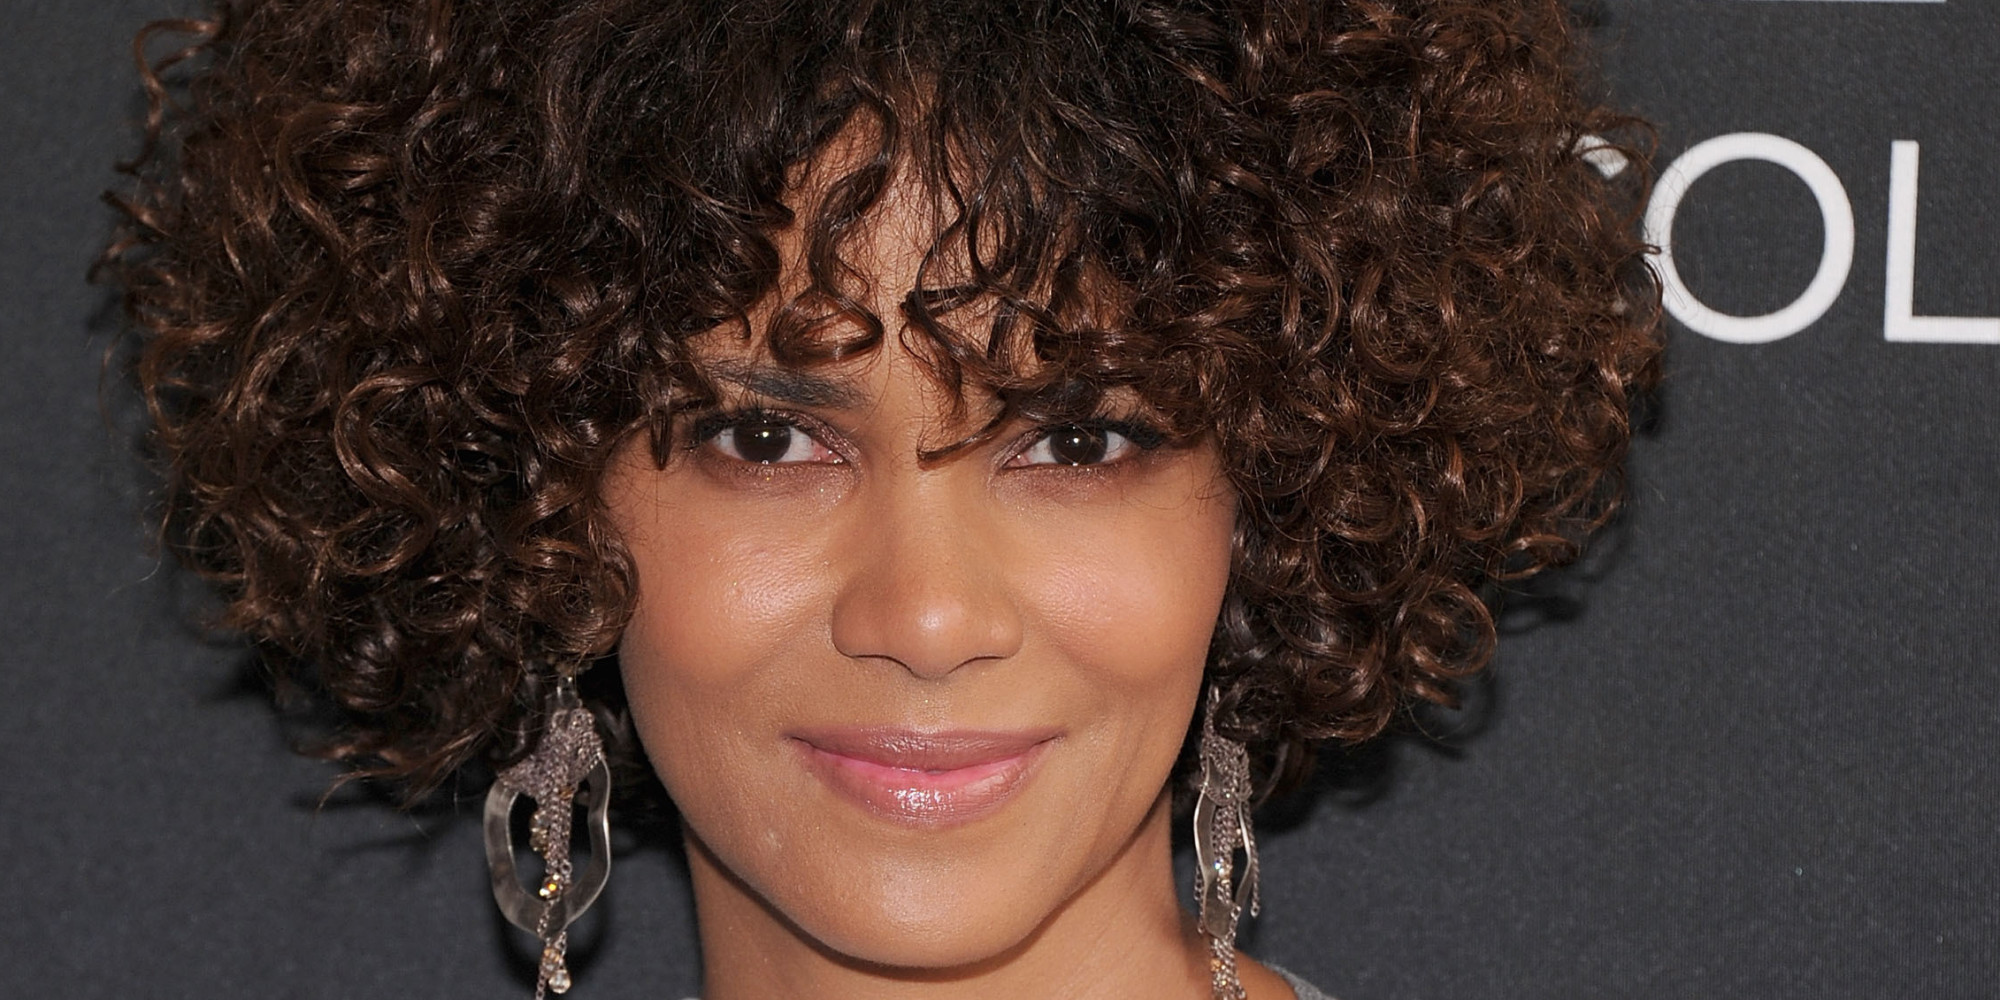 Halle Berry On How She Went Short Advice For Her Daughter Nahla